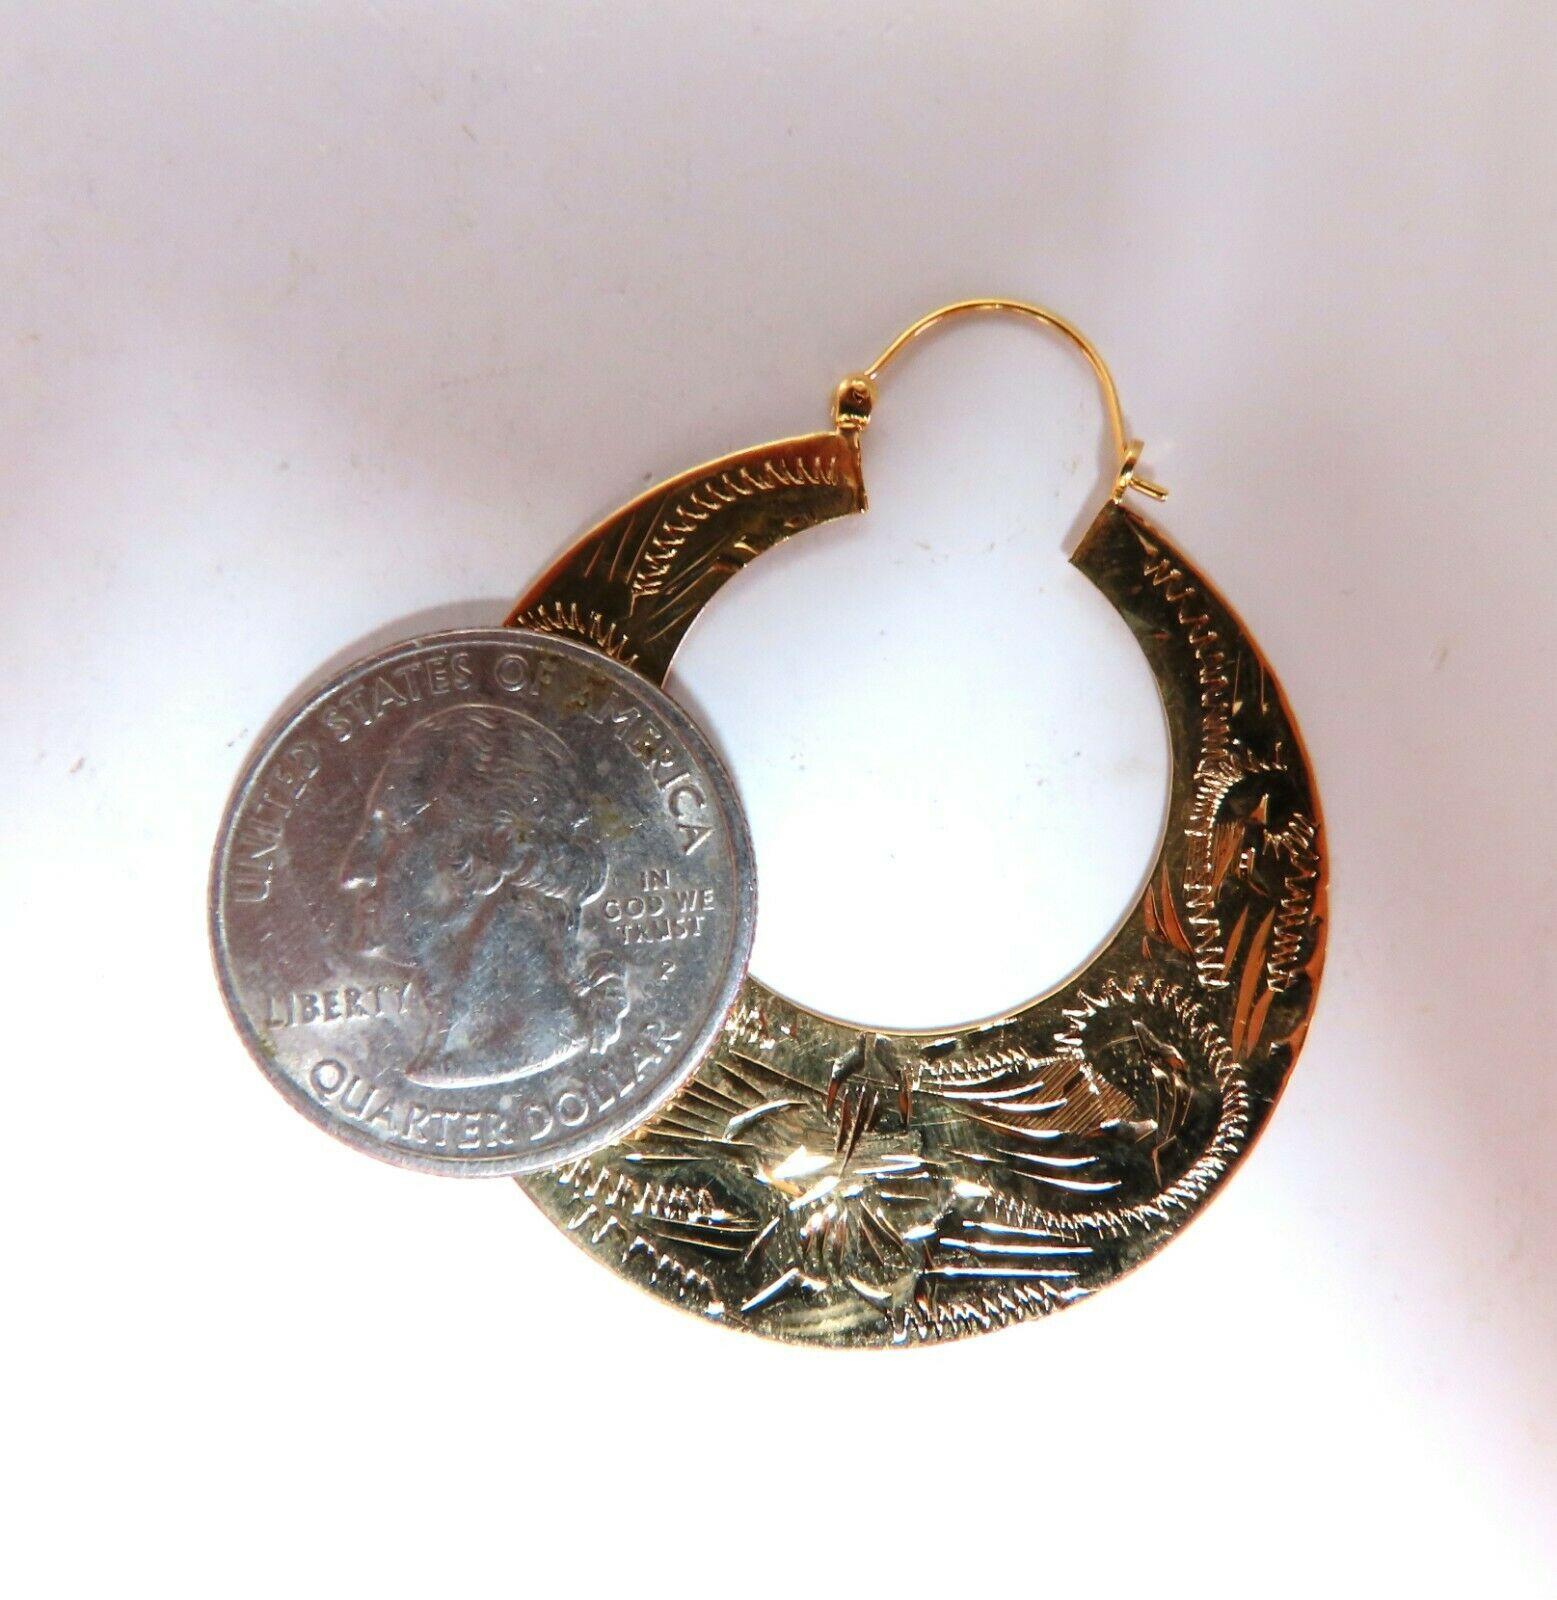 Graver Carved Tibet Crescent Deco Earrings

Intricate Carvings

1.6 inch Diameter

Comfortable Lever Post Clip

7.6 grams / 14kt. Yellow Gold

Earrings are gorgeous made